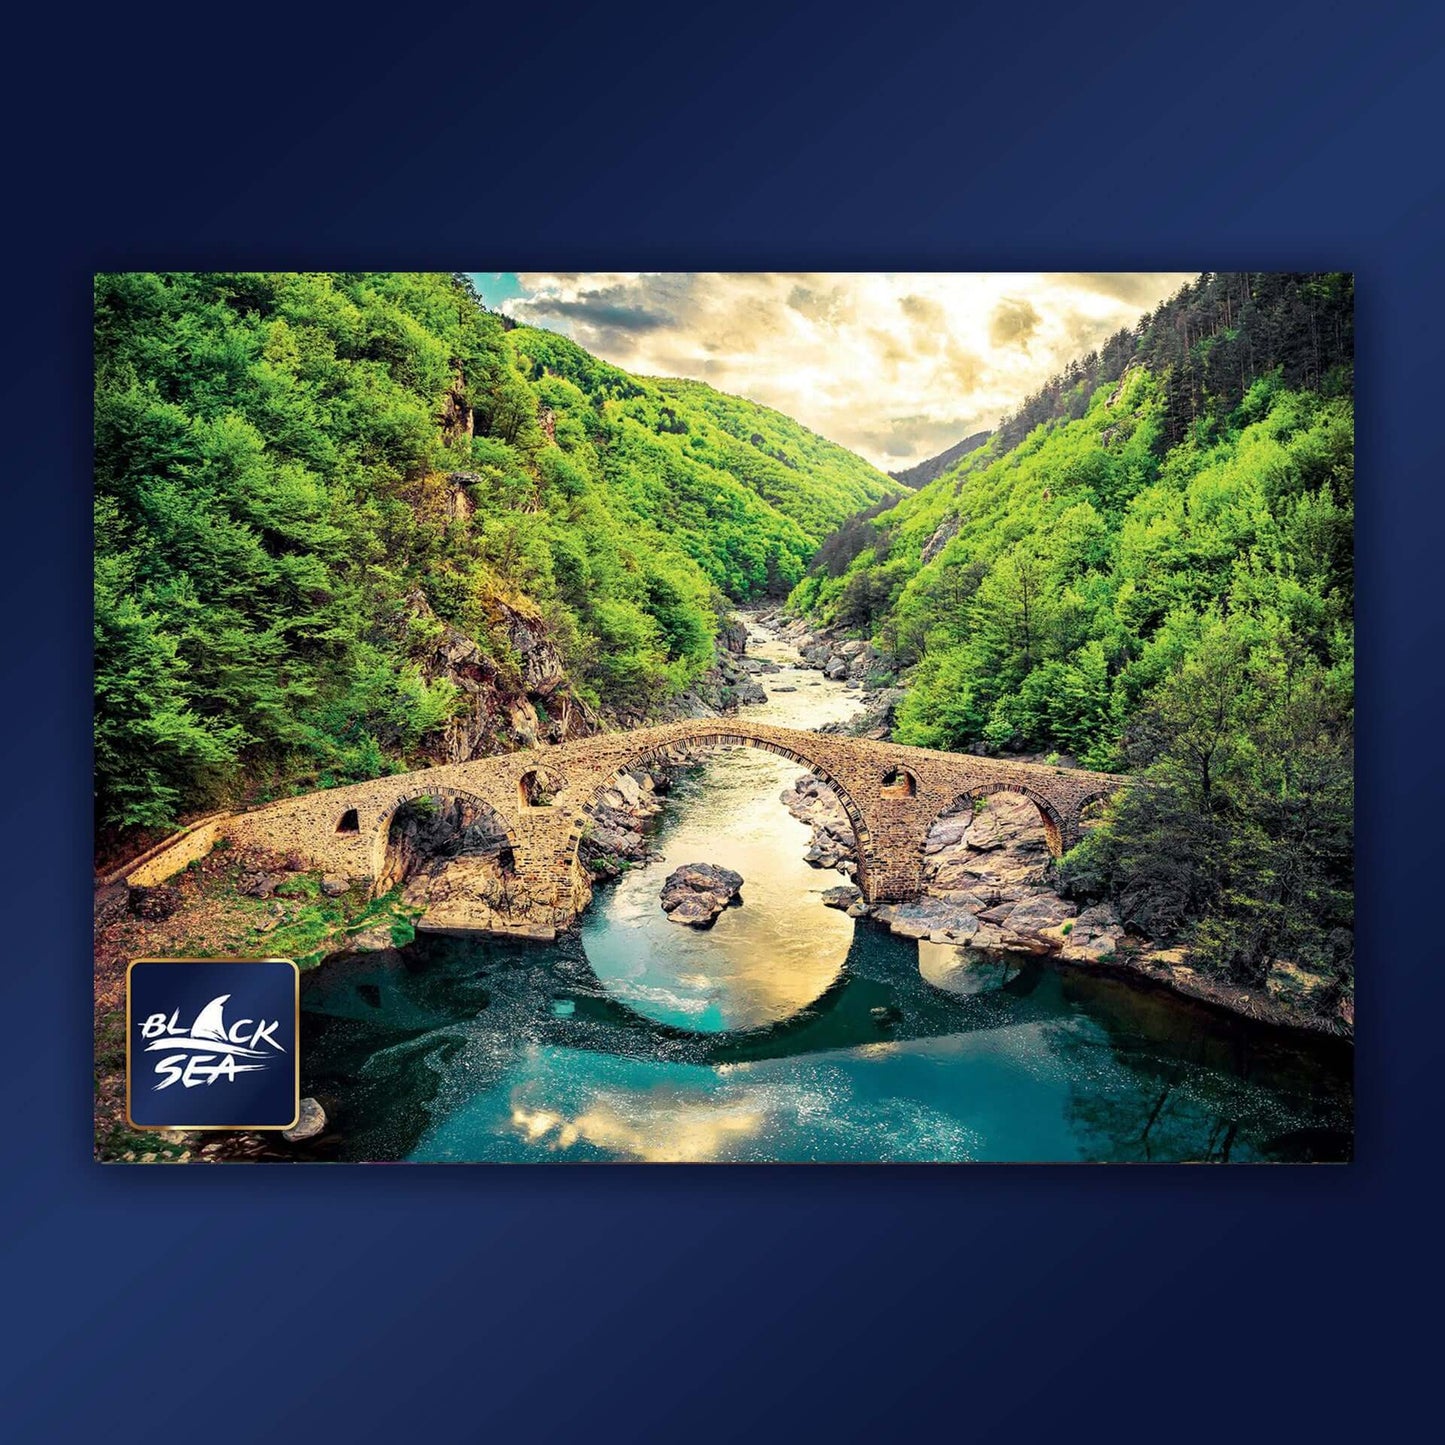 Puzzle Black Sea Premium 1000 pieces - Devil’s Bridge, The Devil’s Bridge that crosses Arda River in the vicinity of the town of Ardino is amazing not only because of its construction, but with the mysterious legends associated with it too. It is one of t